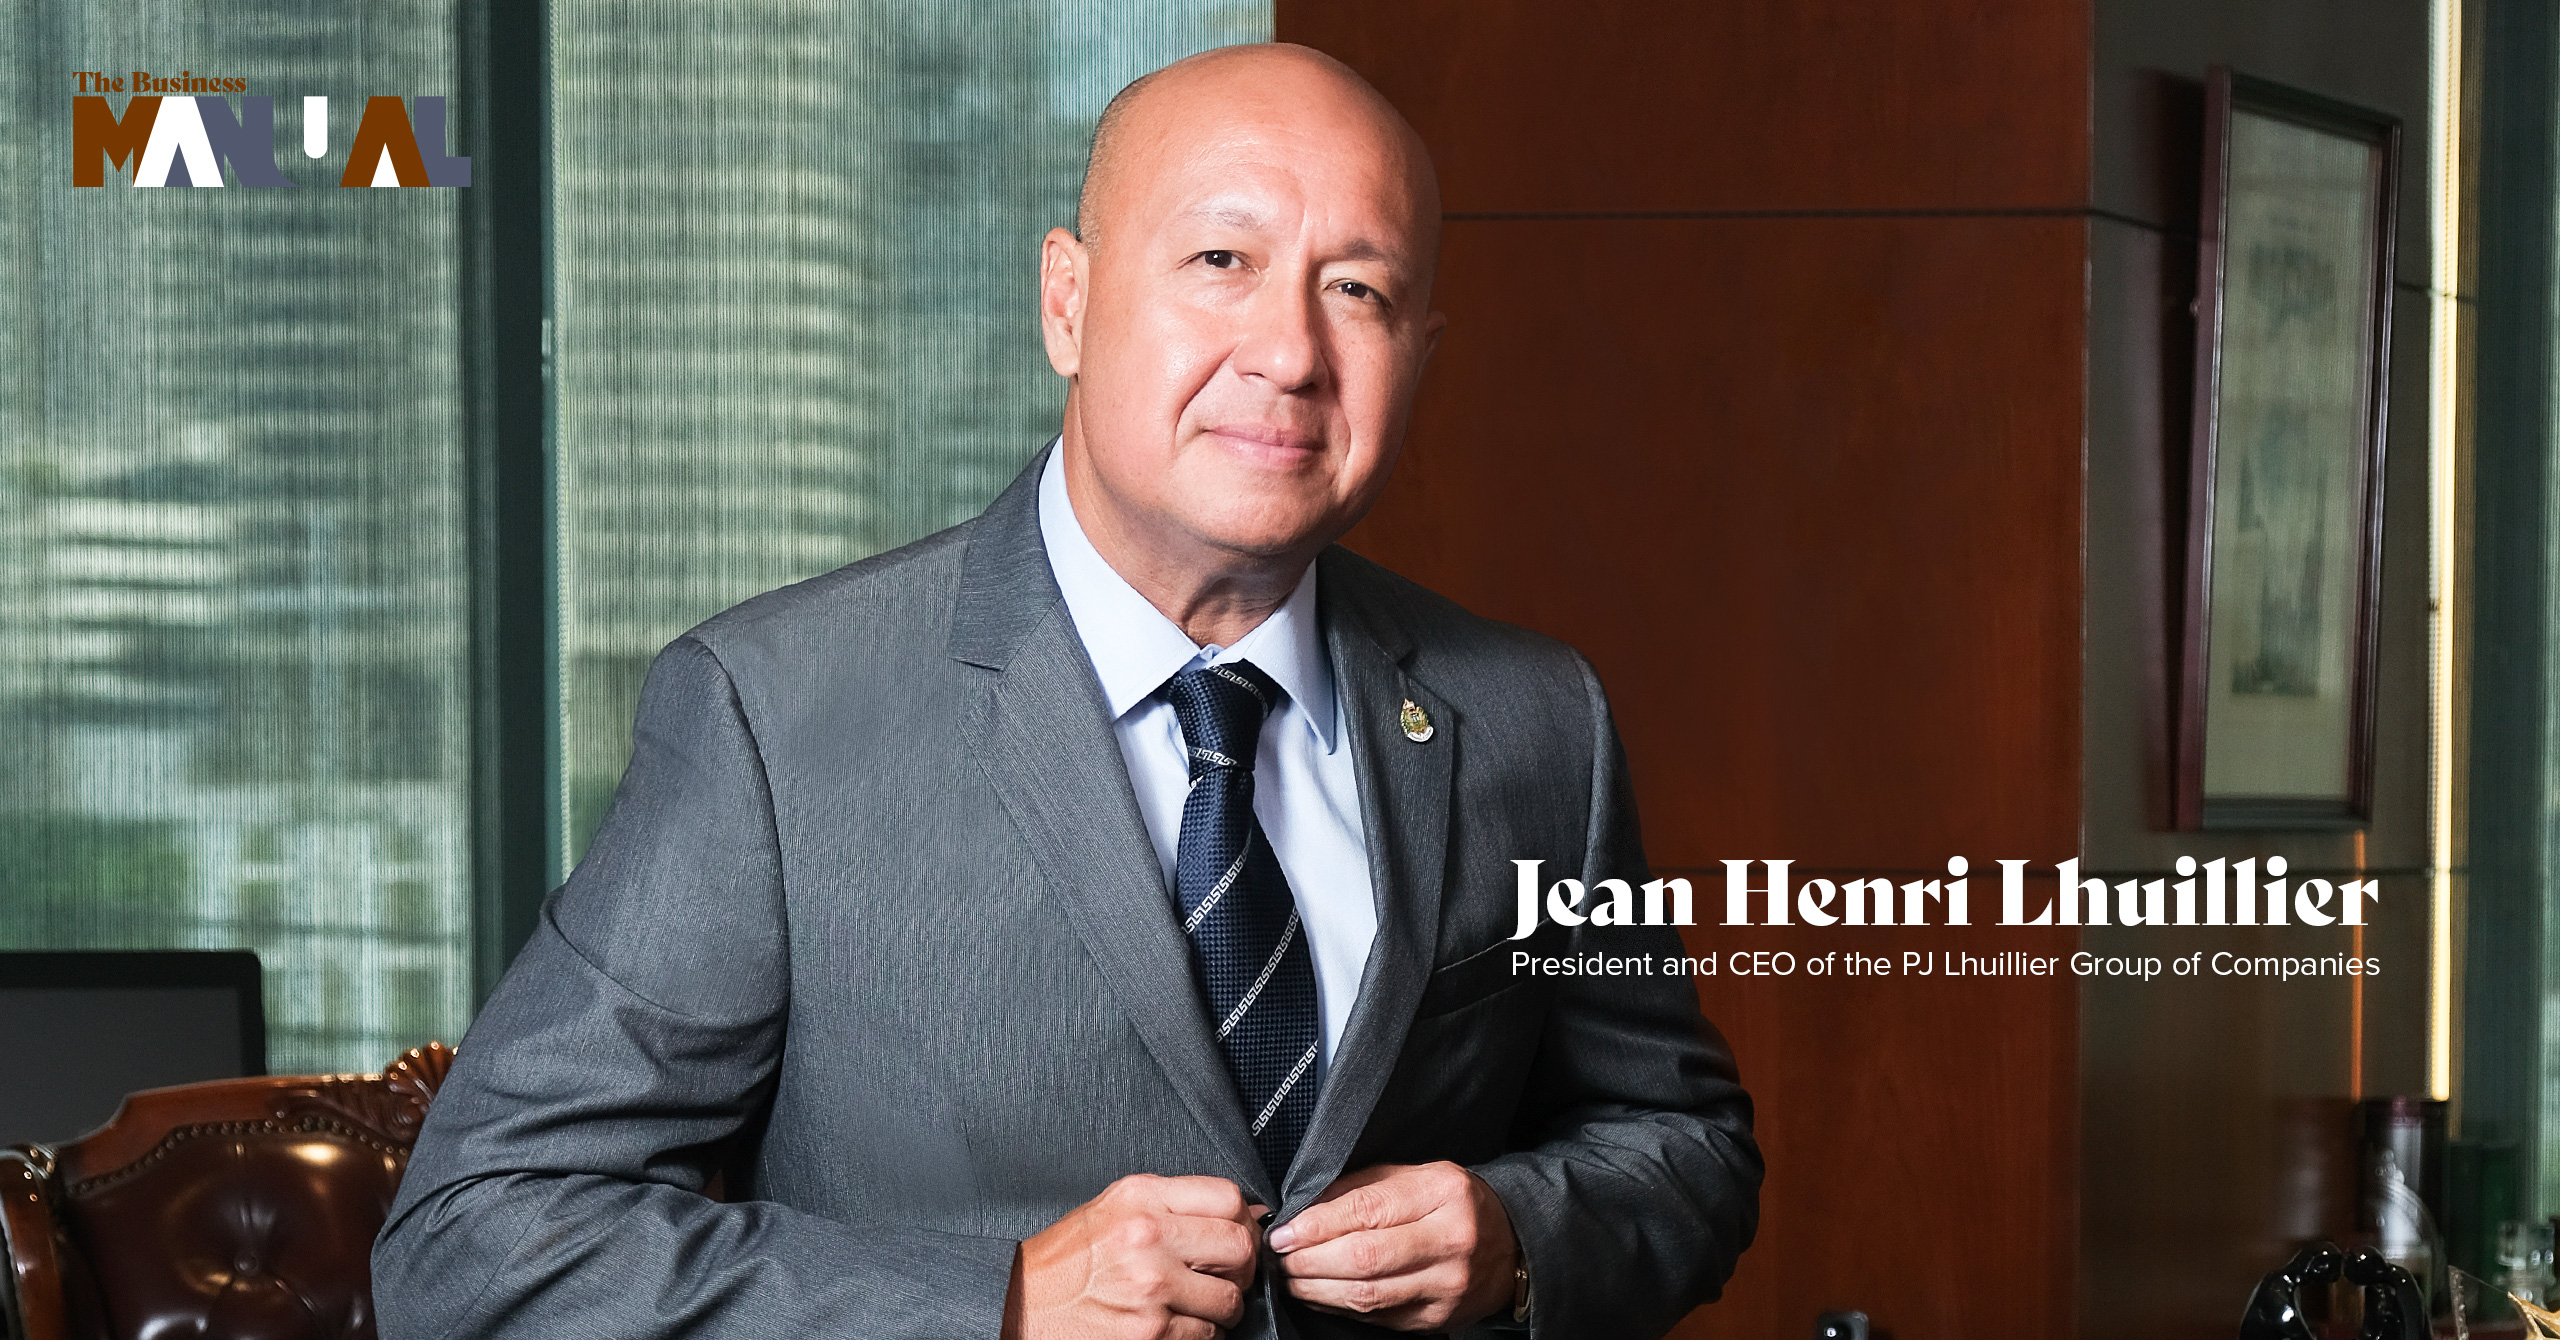 Jean Henri Lhuillier on Strategically Growing a Family Business